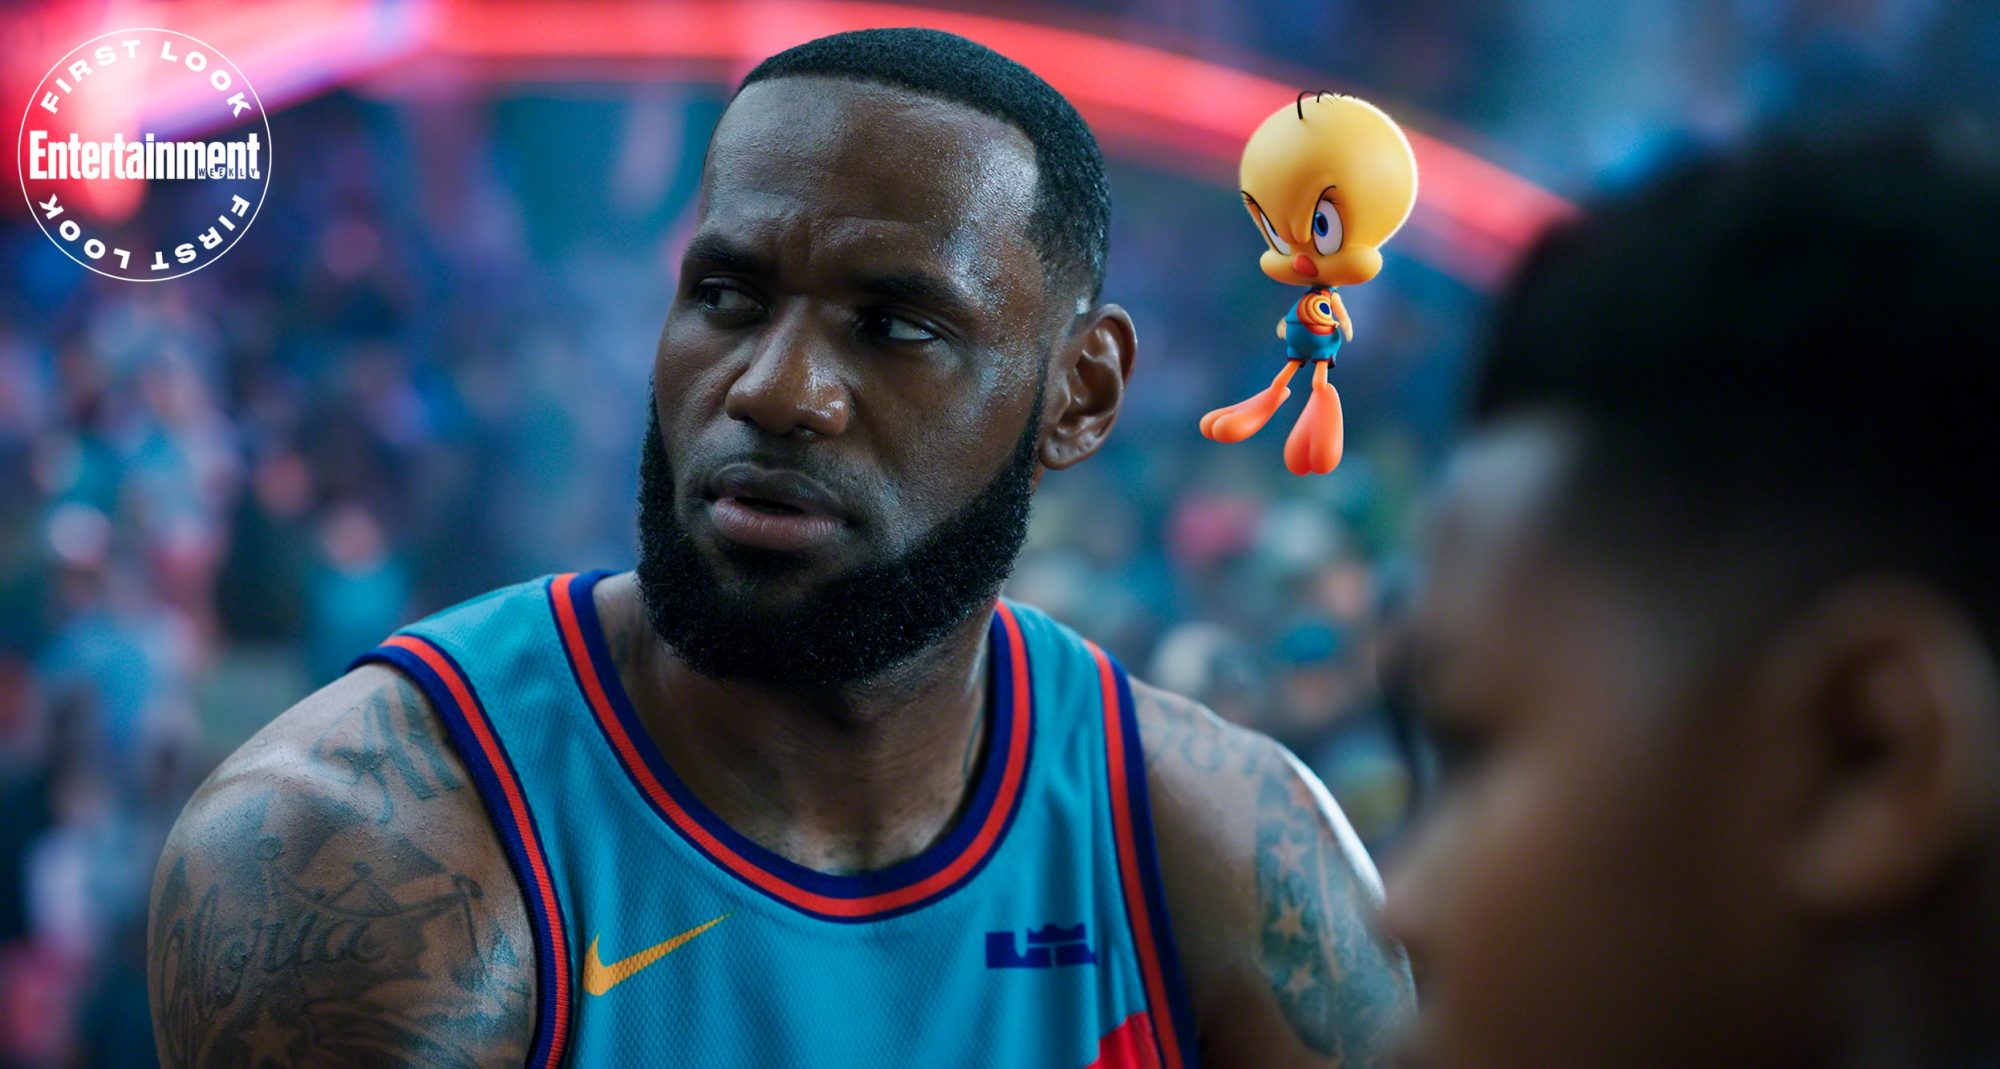 Here Are Some Official Stills from 'Space Jam 2'